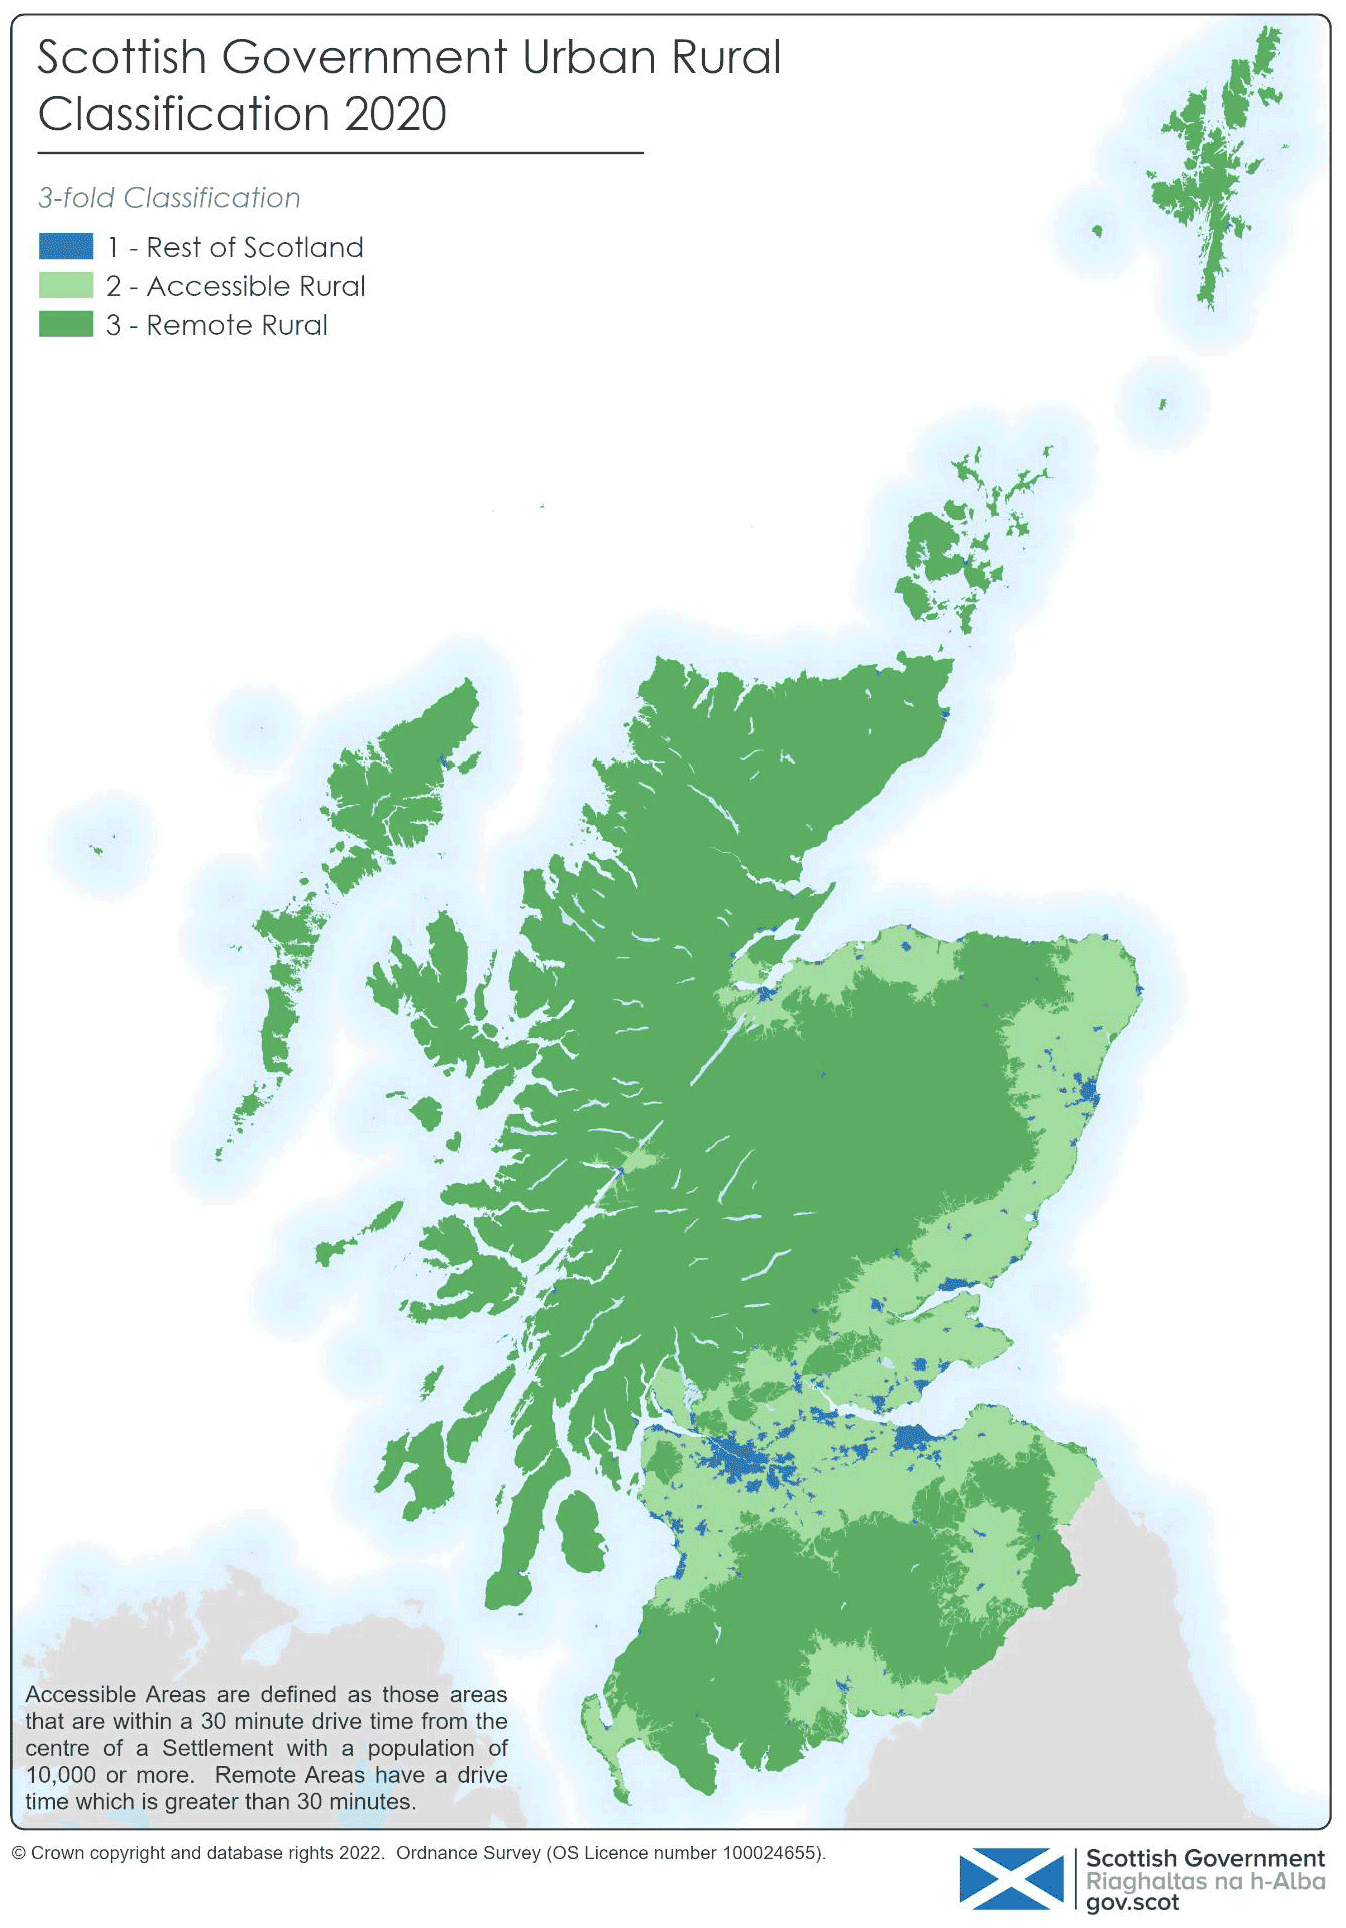 The map shows Scotland at national scale.  Scotland is classified according to an 3-fold classification represented by three colours.  Rest of Scotland areas are royal blue, Accessible Rural areas are light green, and Remote Rural areas are mid-green.

The difference between the 3-fold Classification and the 6-fold and 8-fold Classifications is that all urban areas are classified together as one ‘Rest of Scotland’ category.  In the 3-fold Urban Rural Classification, Rest of Scotland is comprised of the areas defined as Large Urban, Other Urban, Accessible Small Towns, Remote Small Towns, and Very Remote Small Towns in the 8-fold Classification.  Accessible Rural areas in the 3-fold Classification are the same as Accessible Rural in the 8-fold and 6-fold Classifications, and Remote Rural is comprised of the combined areas of Remote Rural and Very Remote Rural in the 8-fold Classification.  
